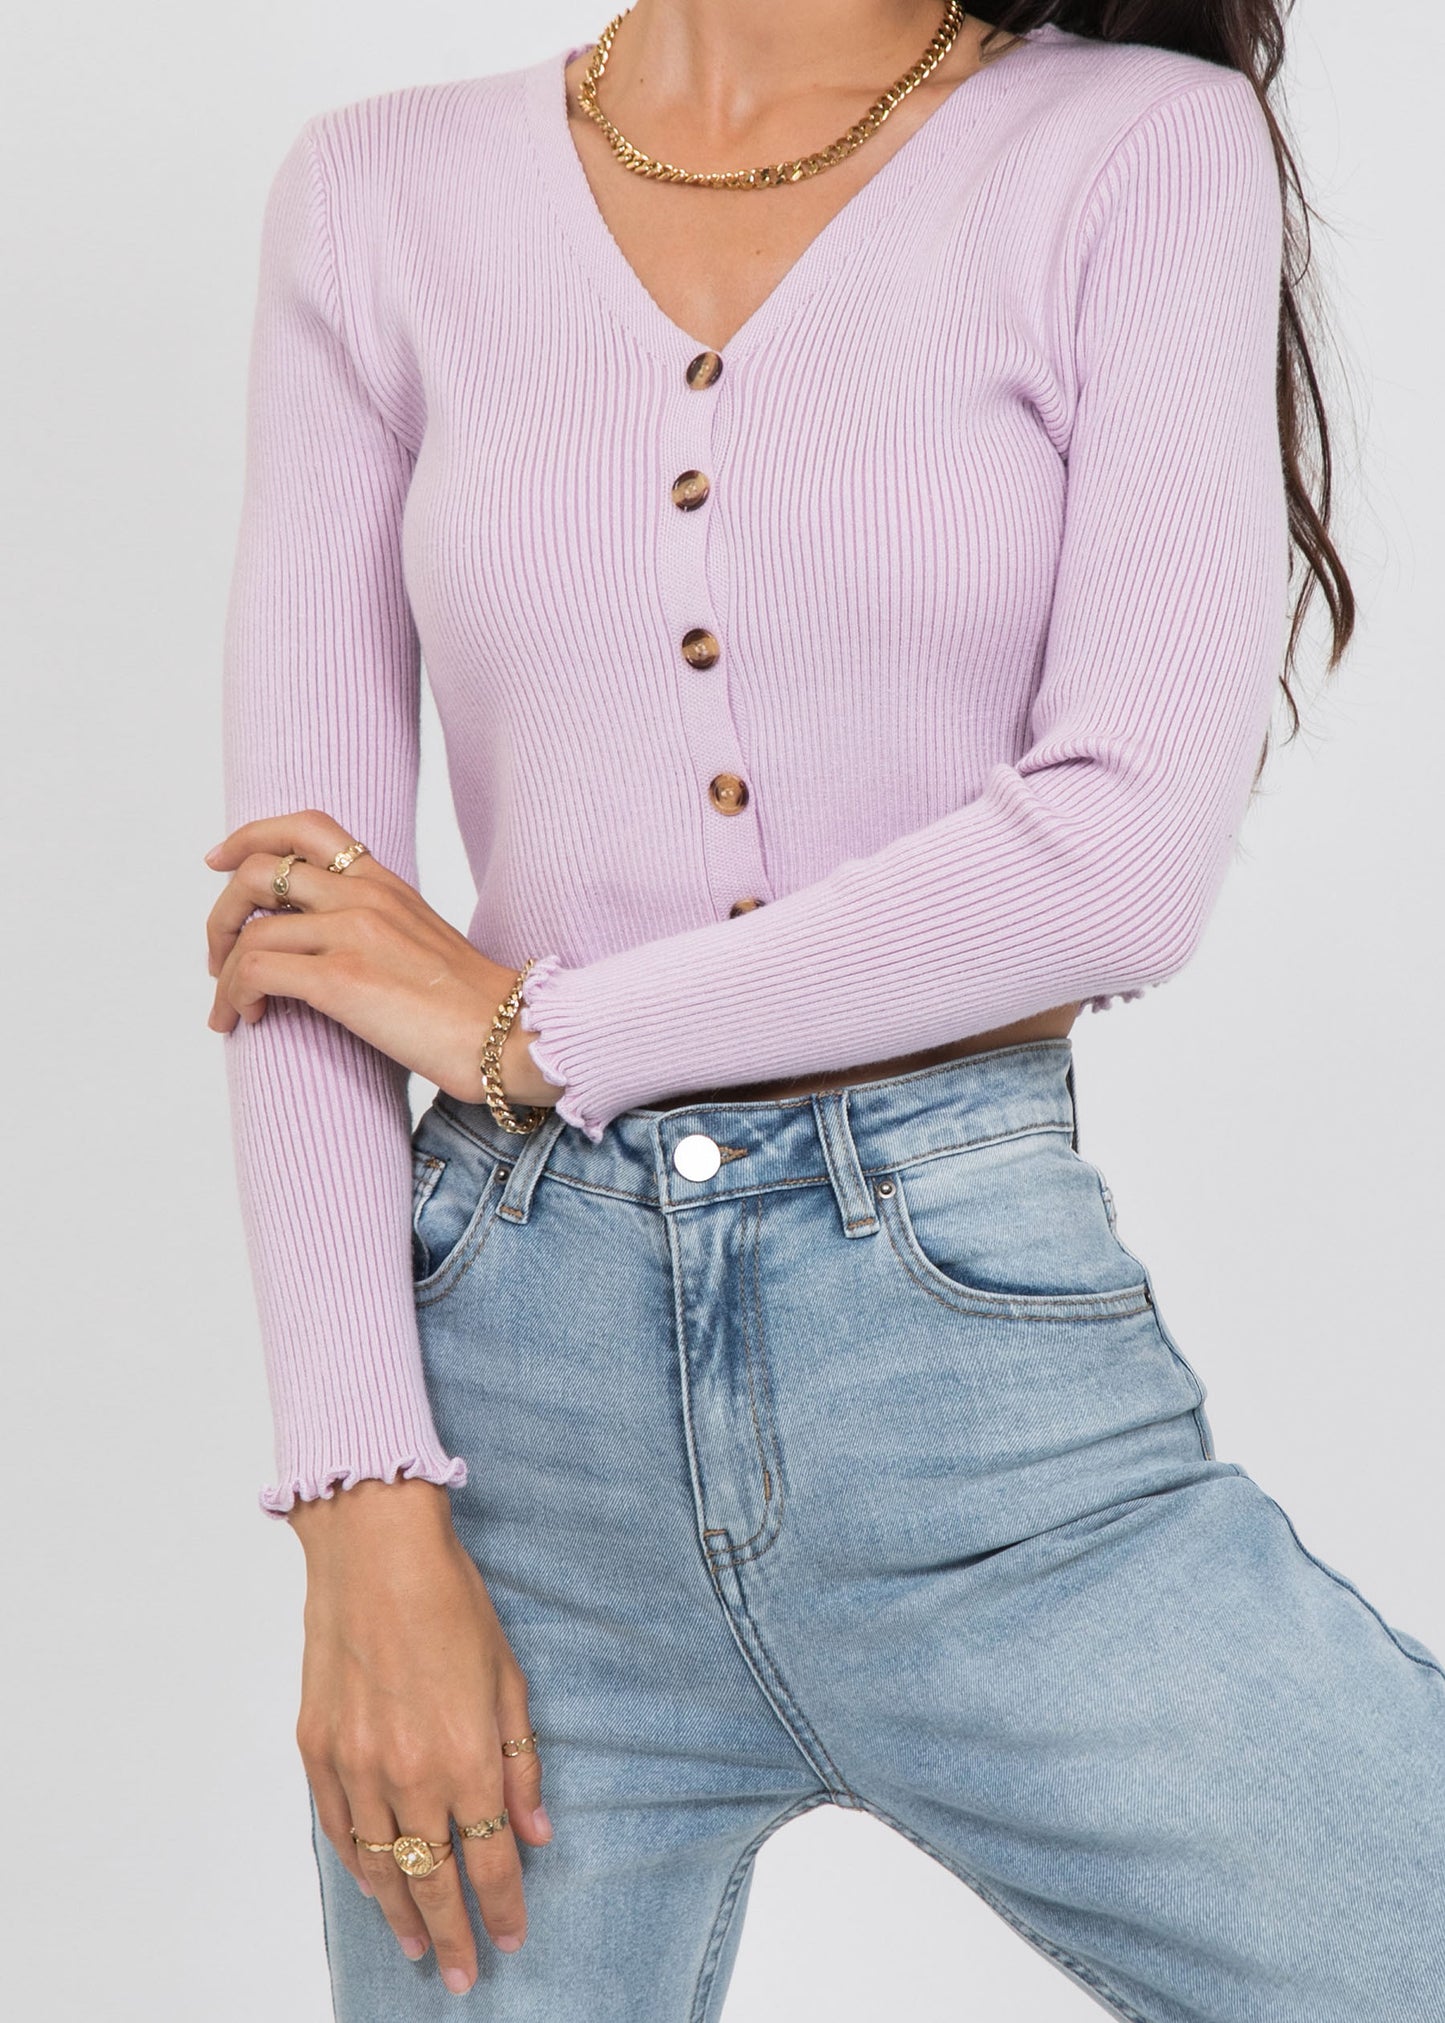 Ruffle hem button front ribbed cardigan in lilac